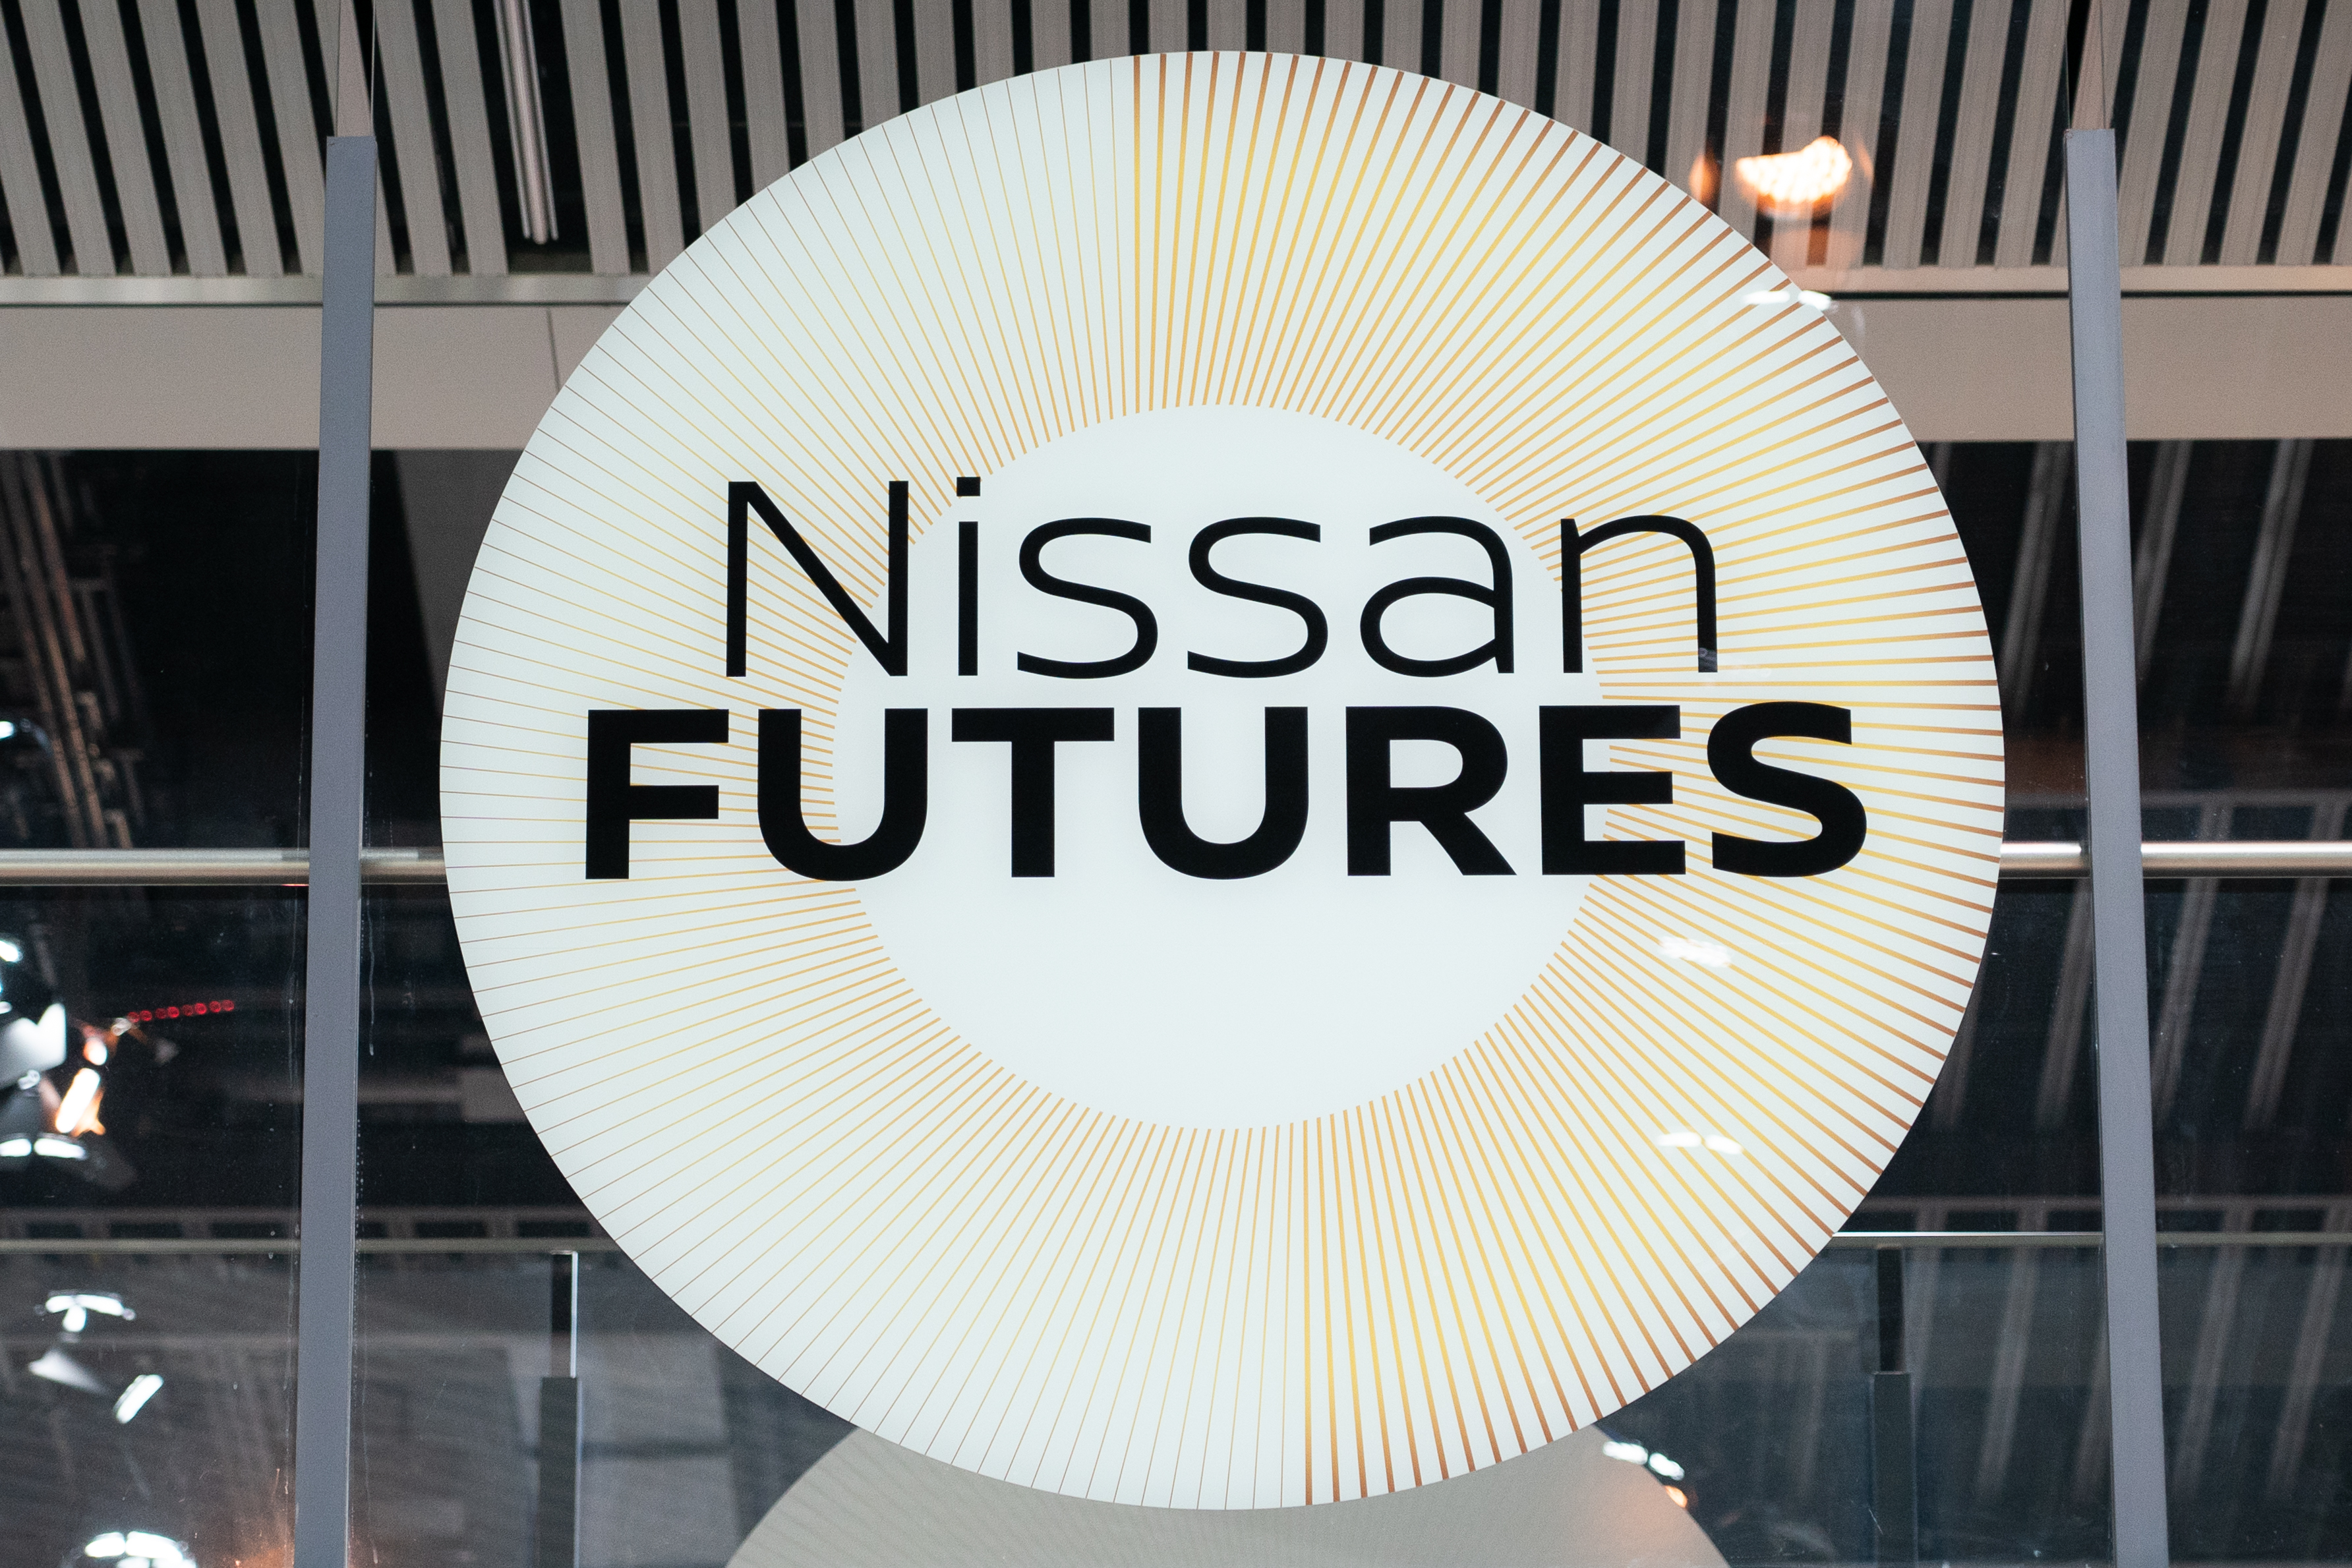 Investment of 20 trillion yen in the next five years - Nissan announces its 2030 vision.